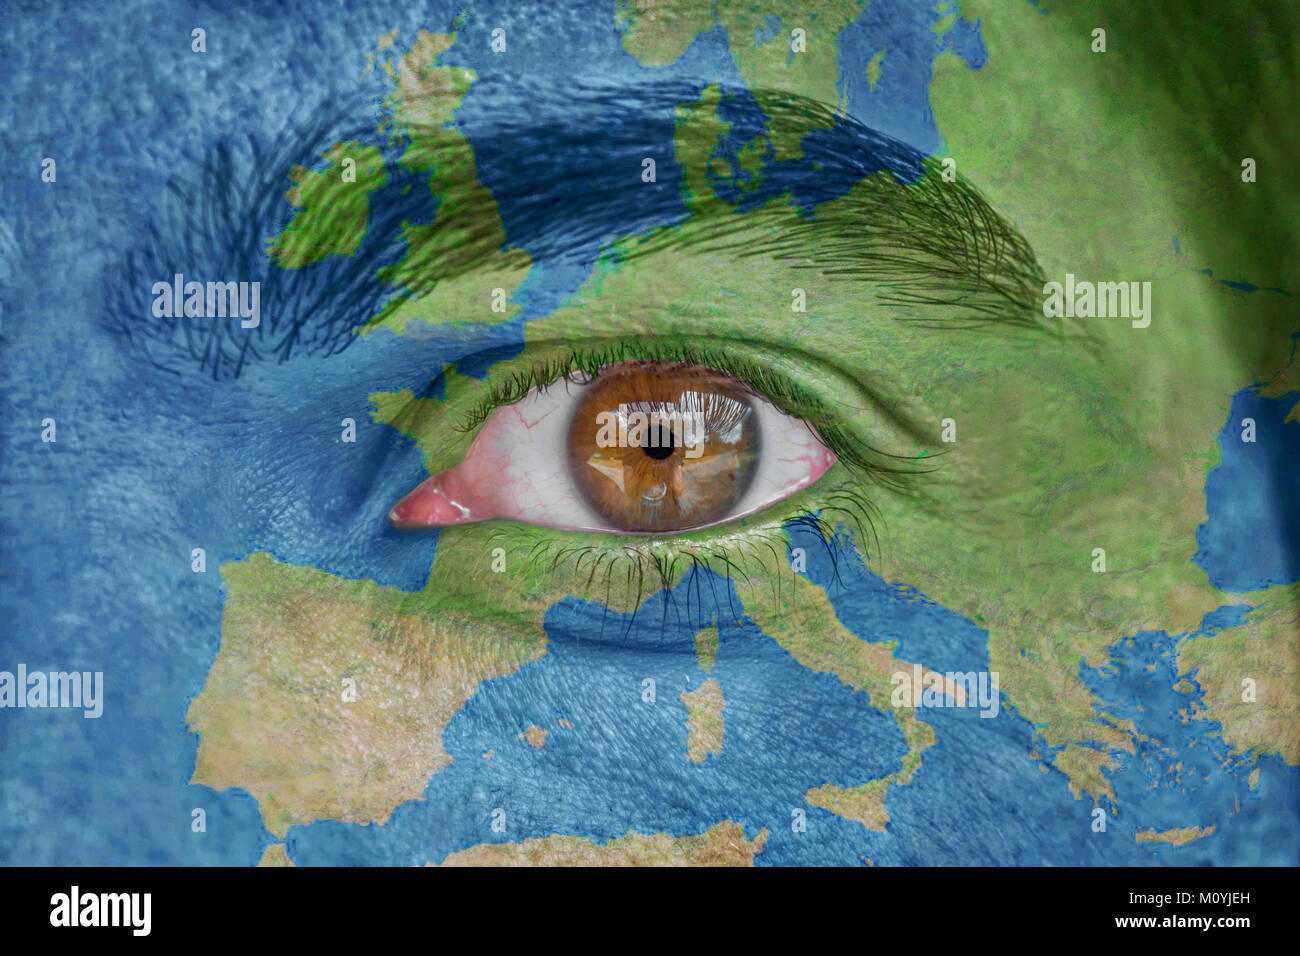 Human face and eye painted with europe space geography map Stock Photo